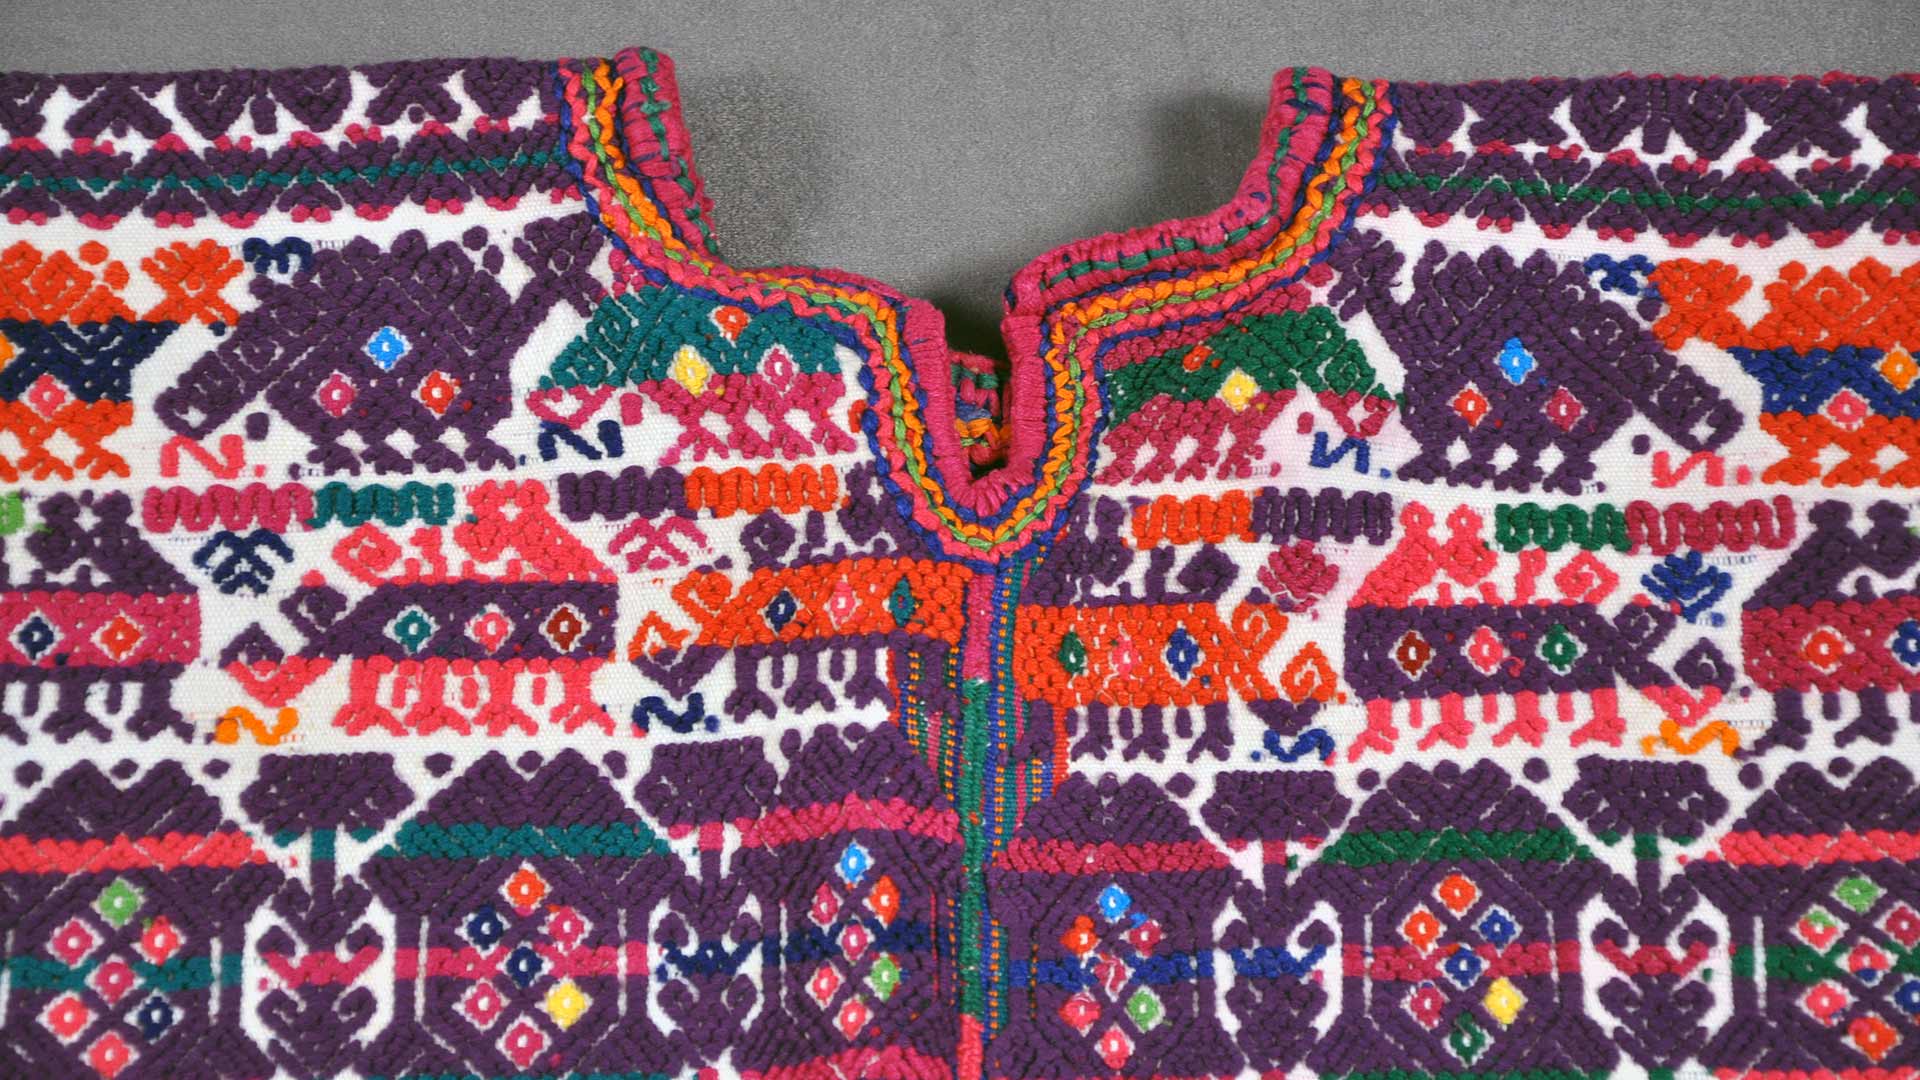 Kieffer-Lopez Collection of Ethnographic Textiles and Artifacts